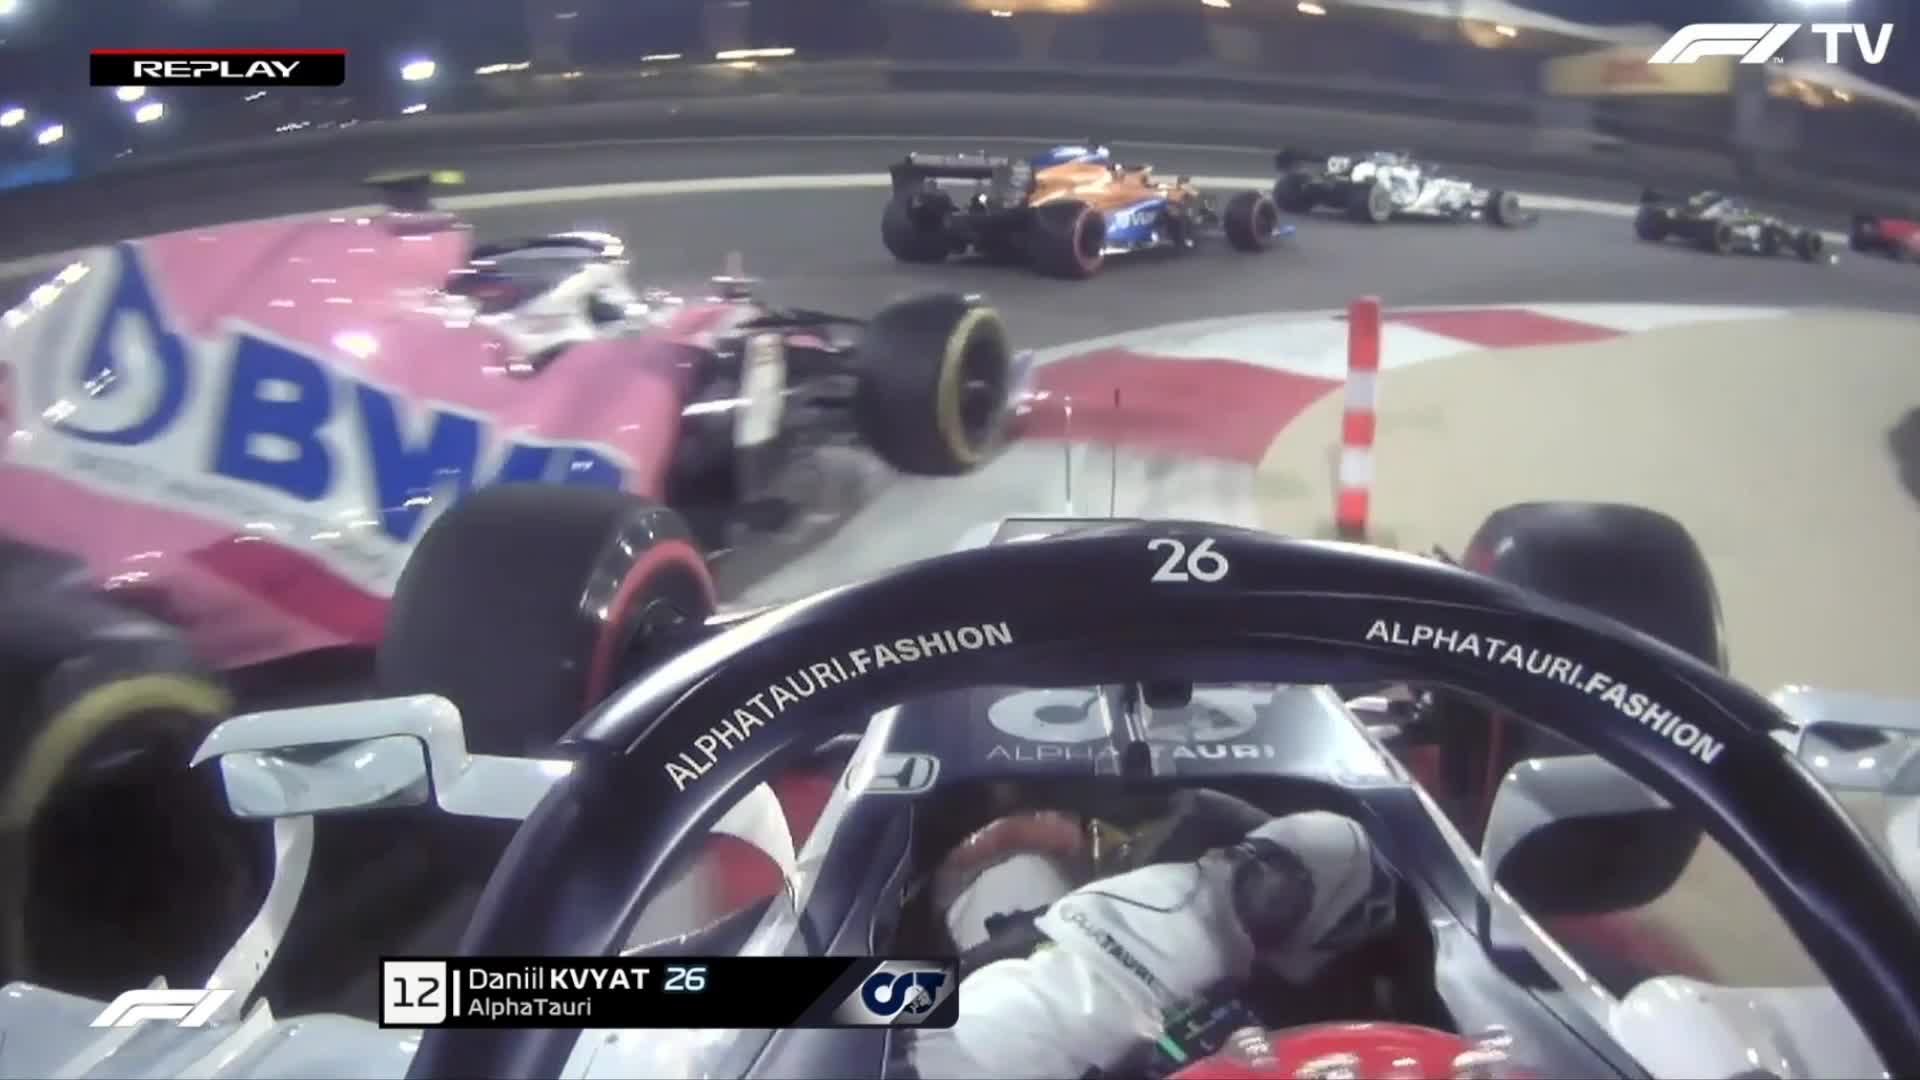 OC 14 instances of drivers colliding with Lance Stroll while attempting to pass him, and the racing stewards decisions